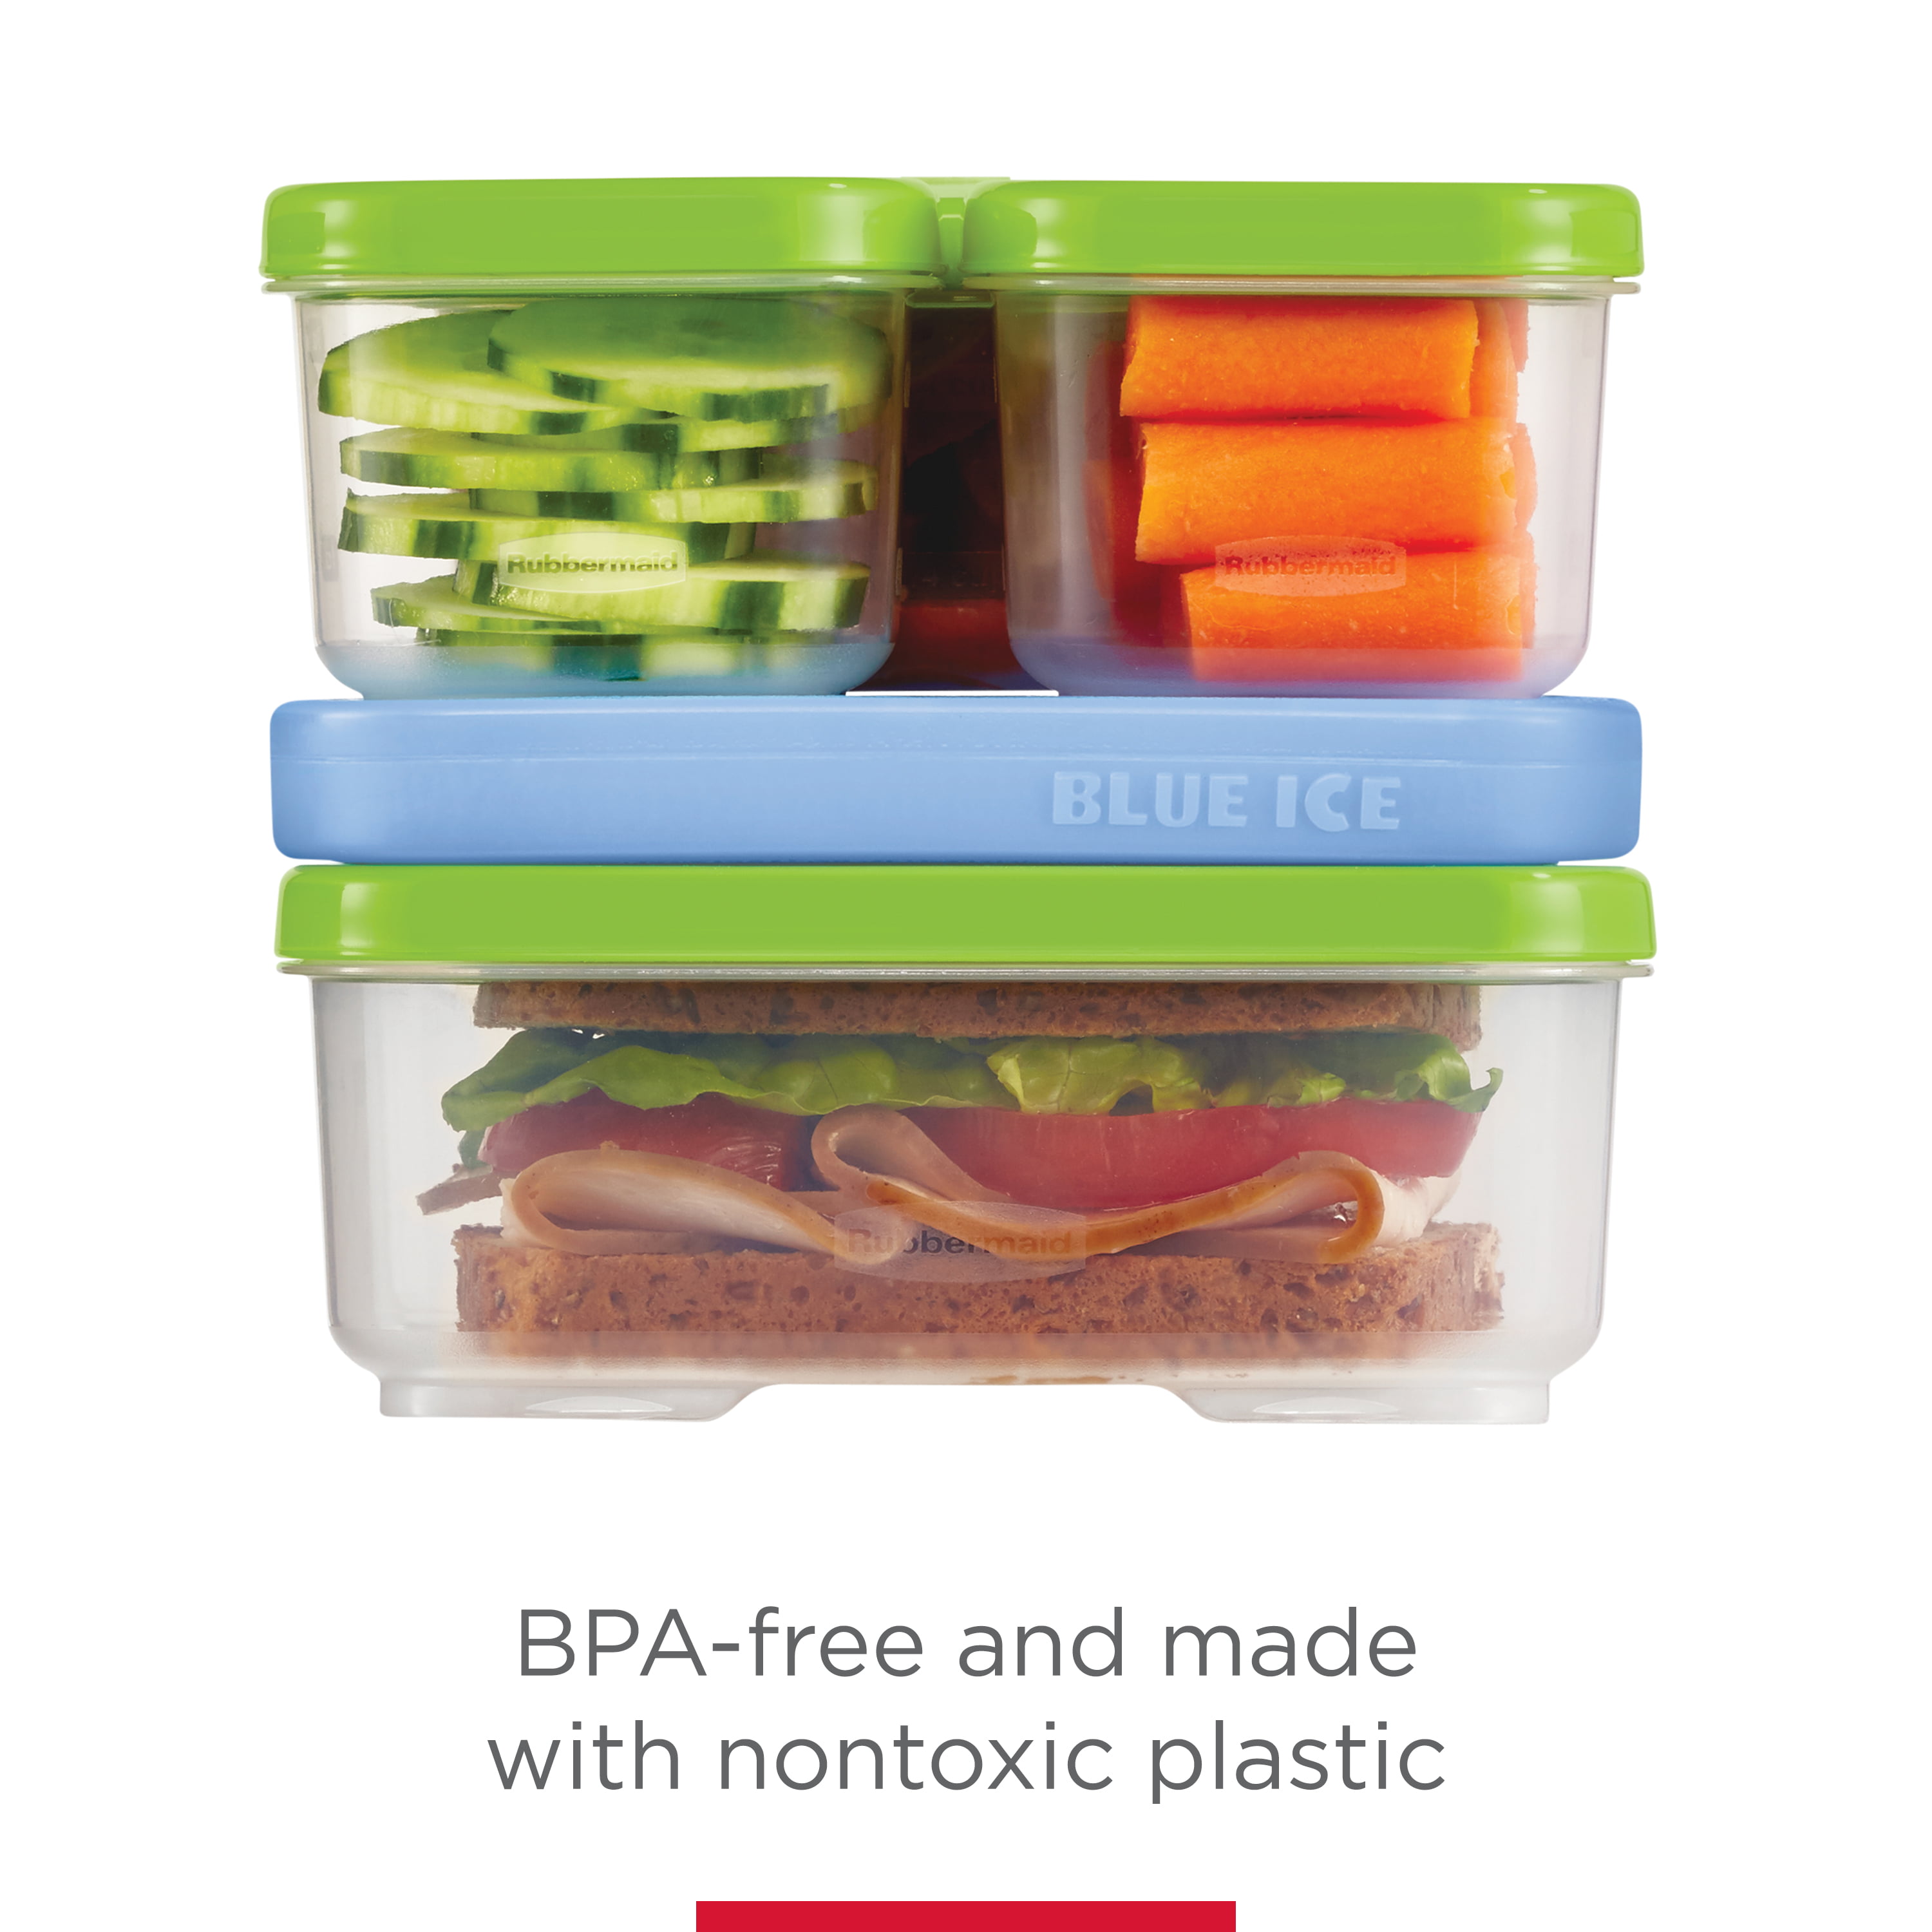 Save Money and Space Packing Lunches With Rubbermaid LunchBlox Kits